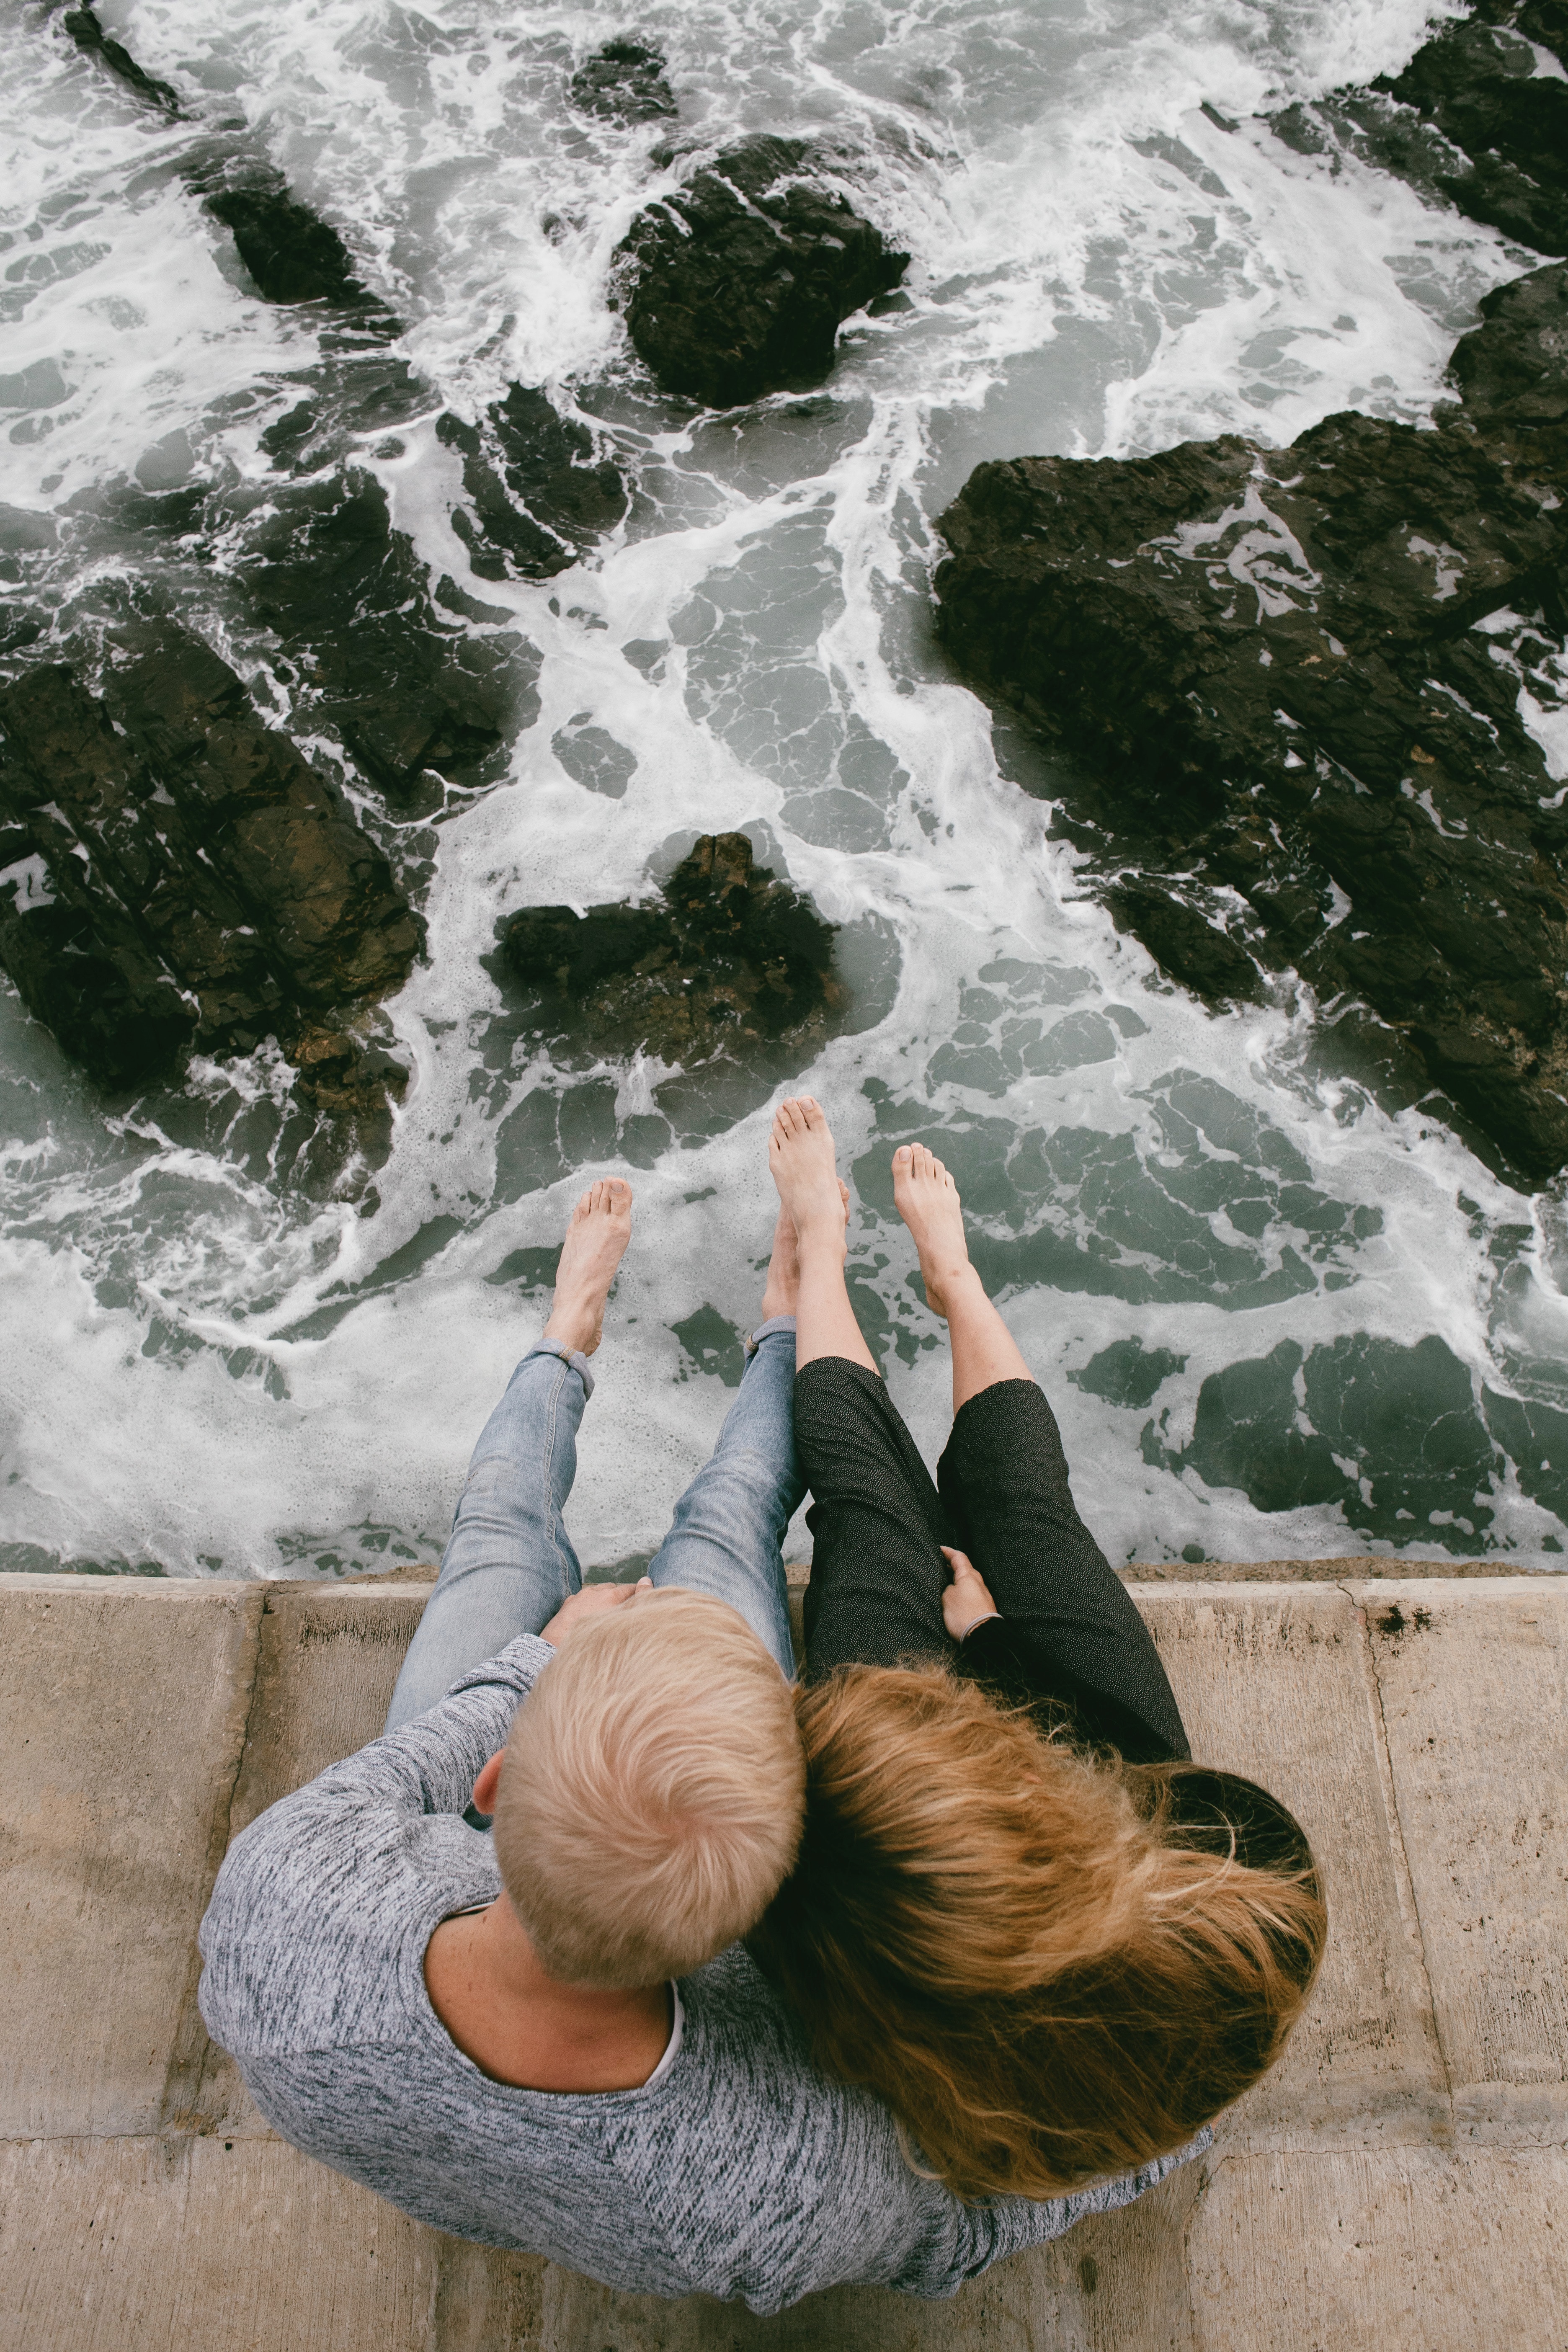 A photo of a couple sitting on a cliff near body of water | Source: Unsplash